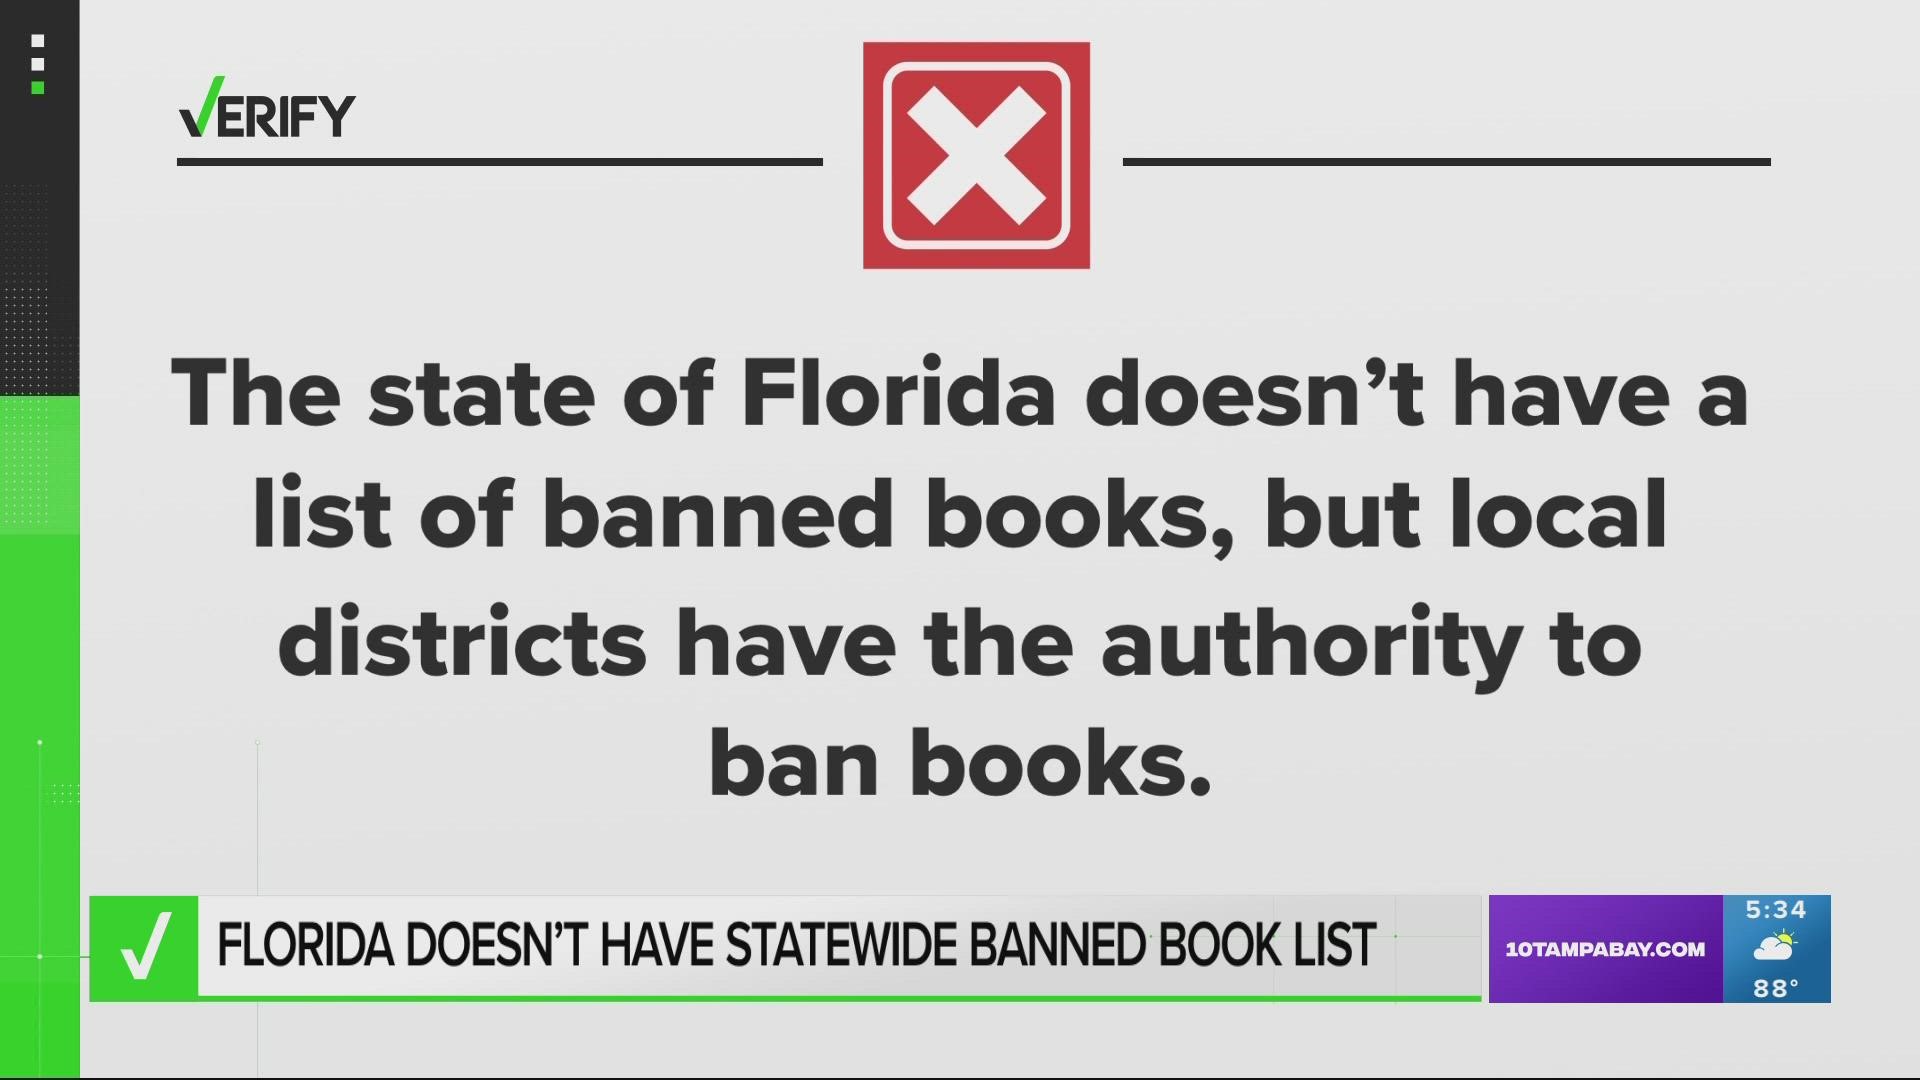 VERIFY viewers asked if a meme showing a list of banned books in Florida is real. It’s not. However, school districts in Florida can choose to ban books.